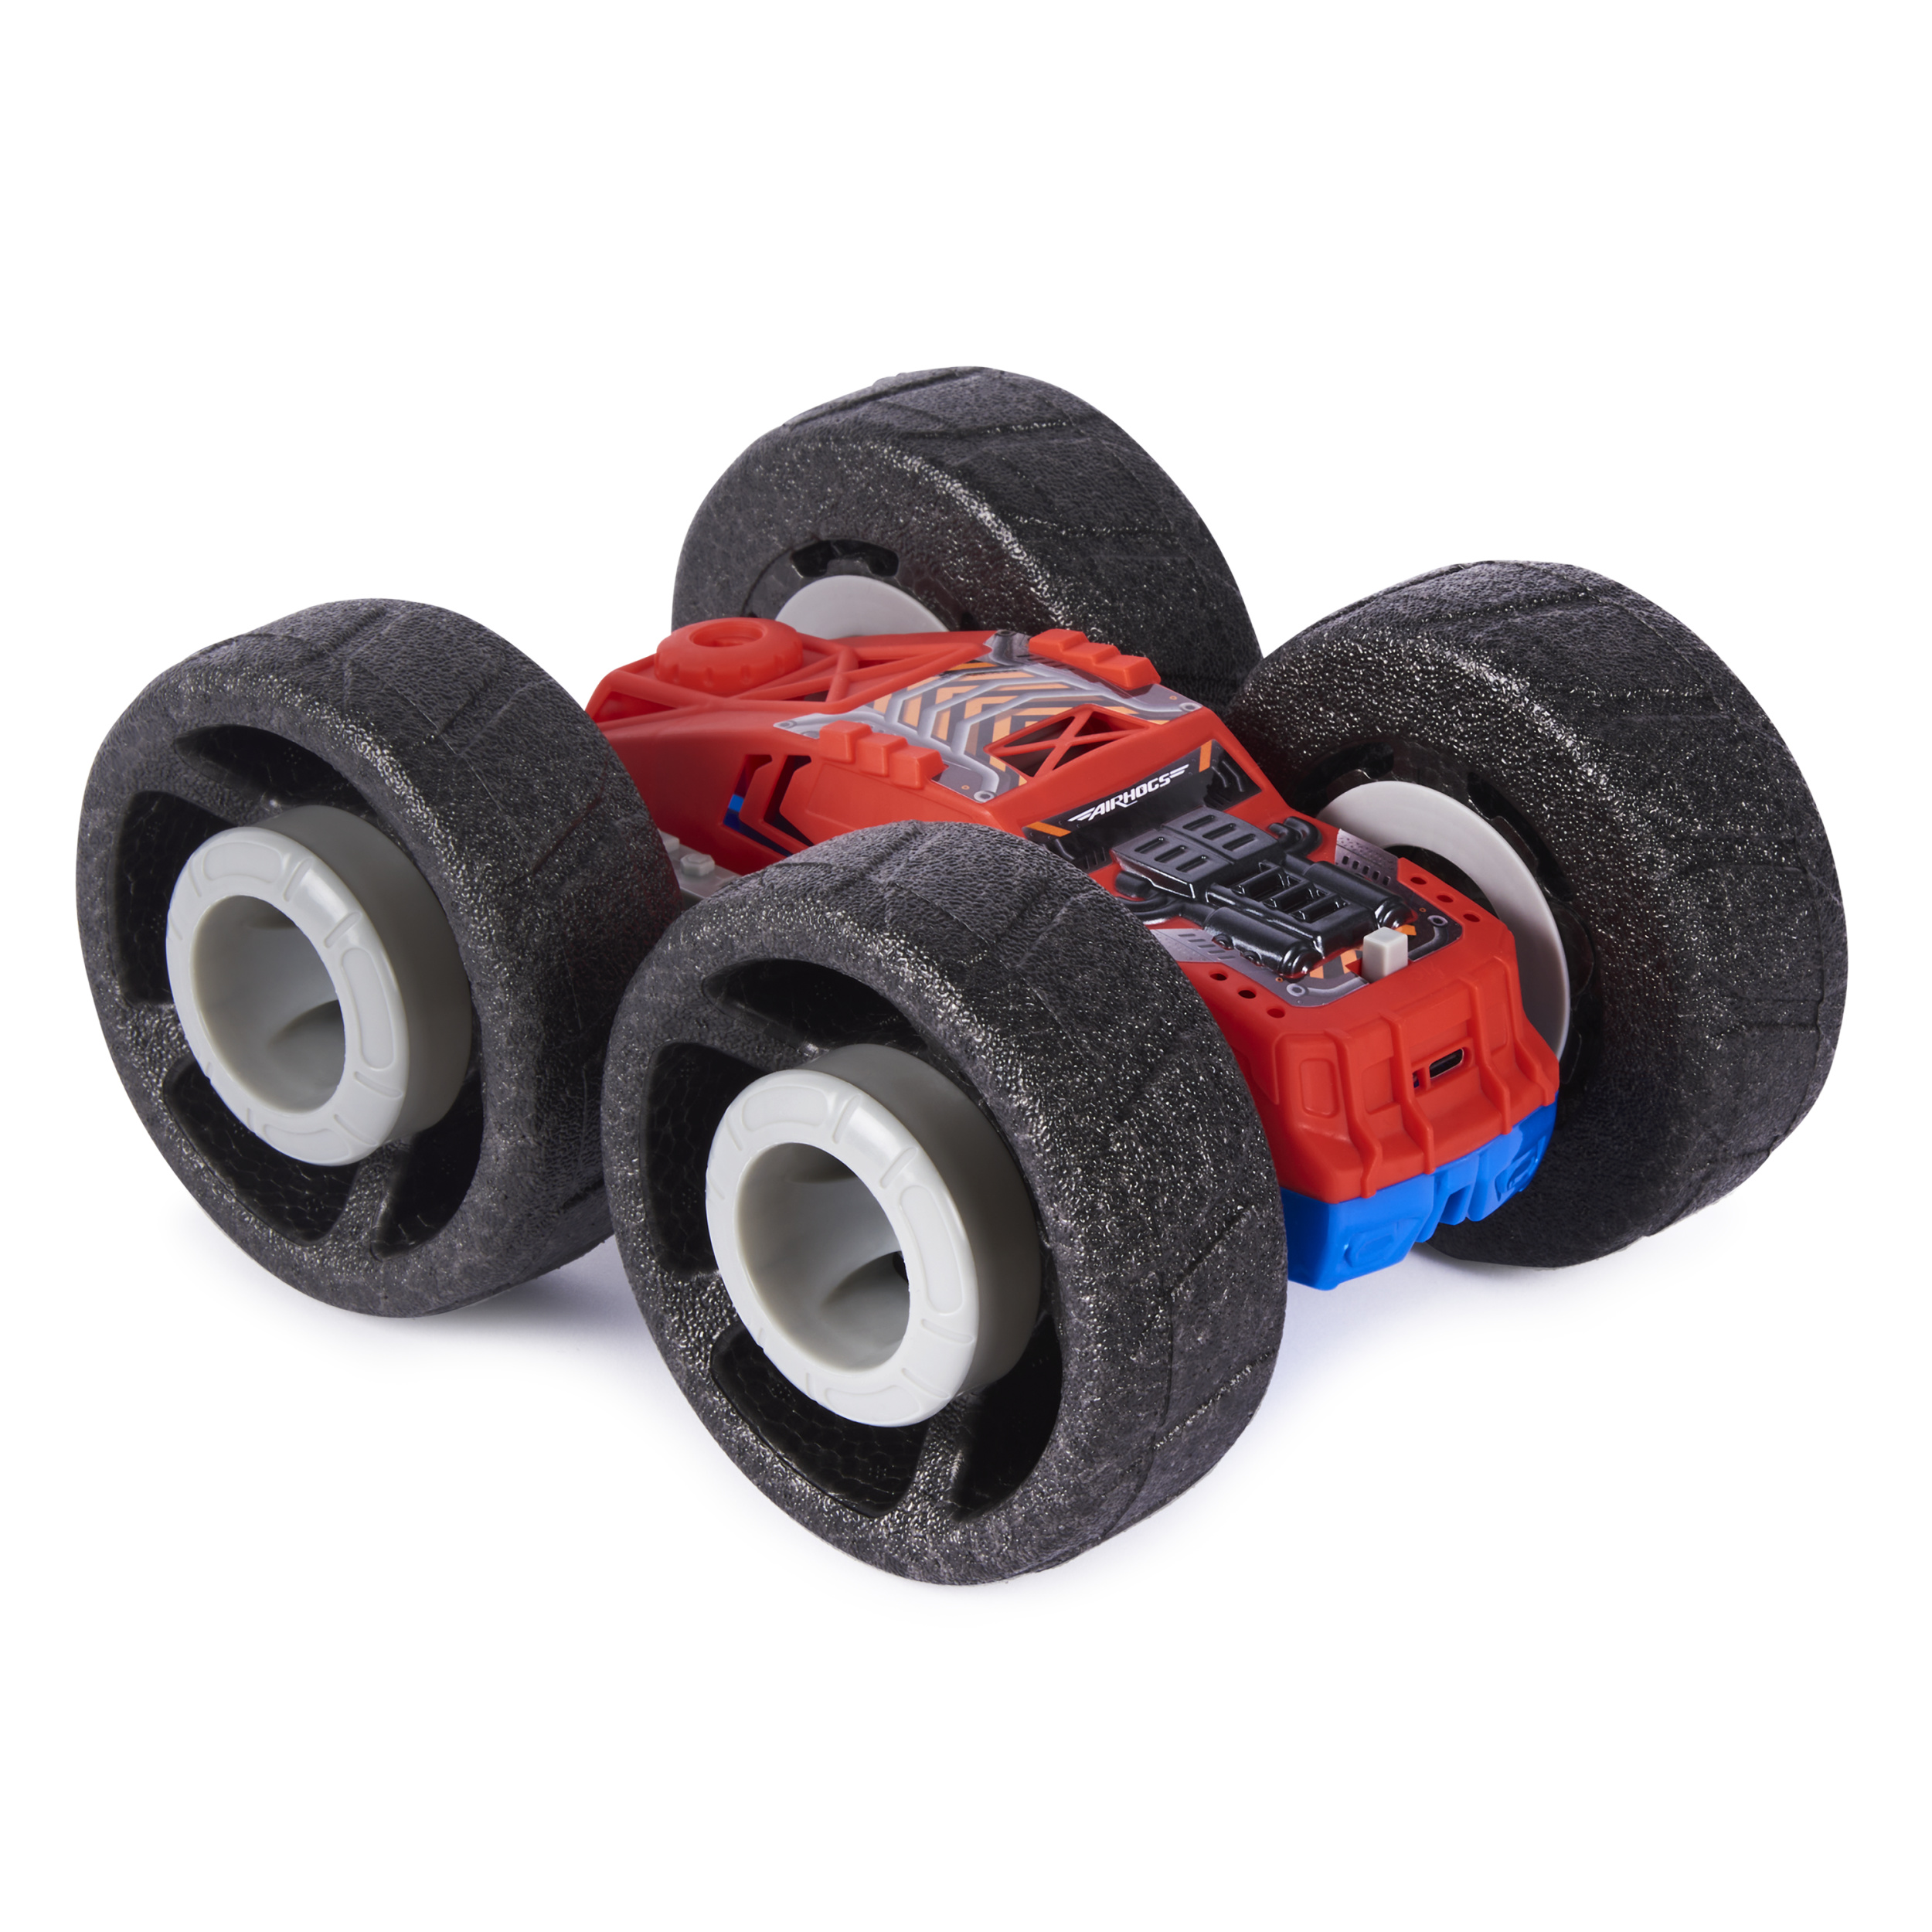 Air Hogs Super Soft, Flippin Frenzy 2-in-1 Stunt RC Vehicle - image 3 of 6